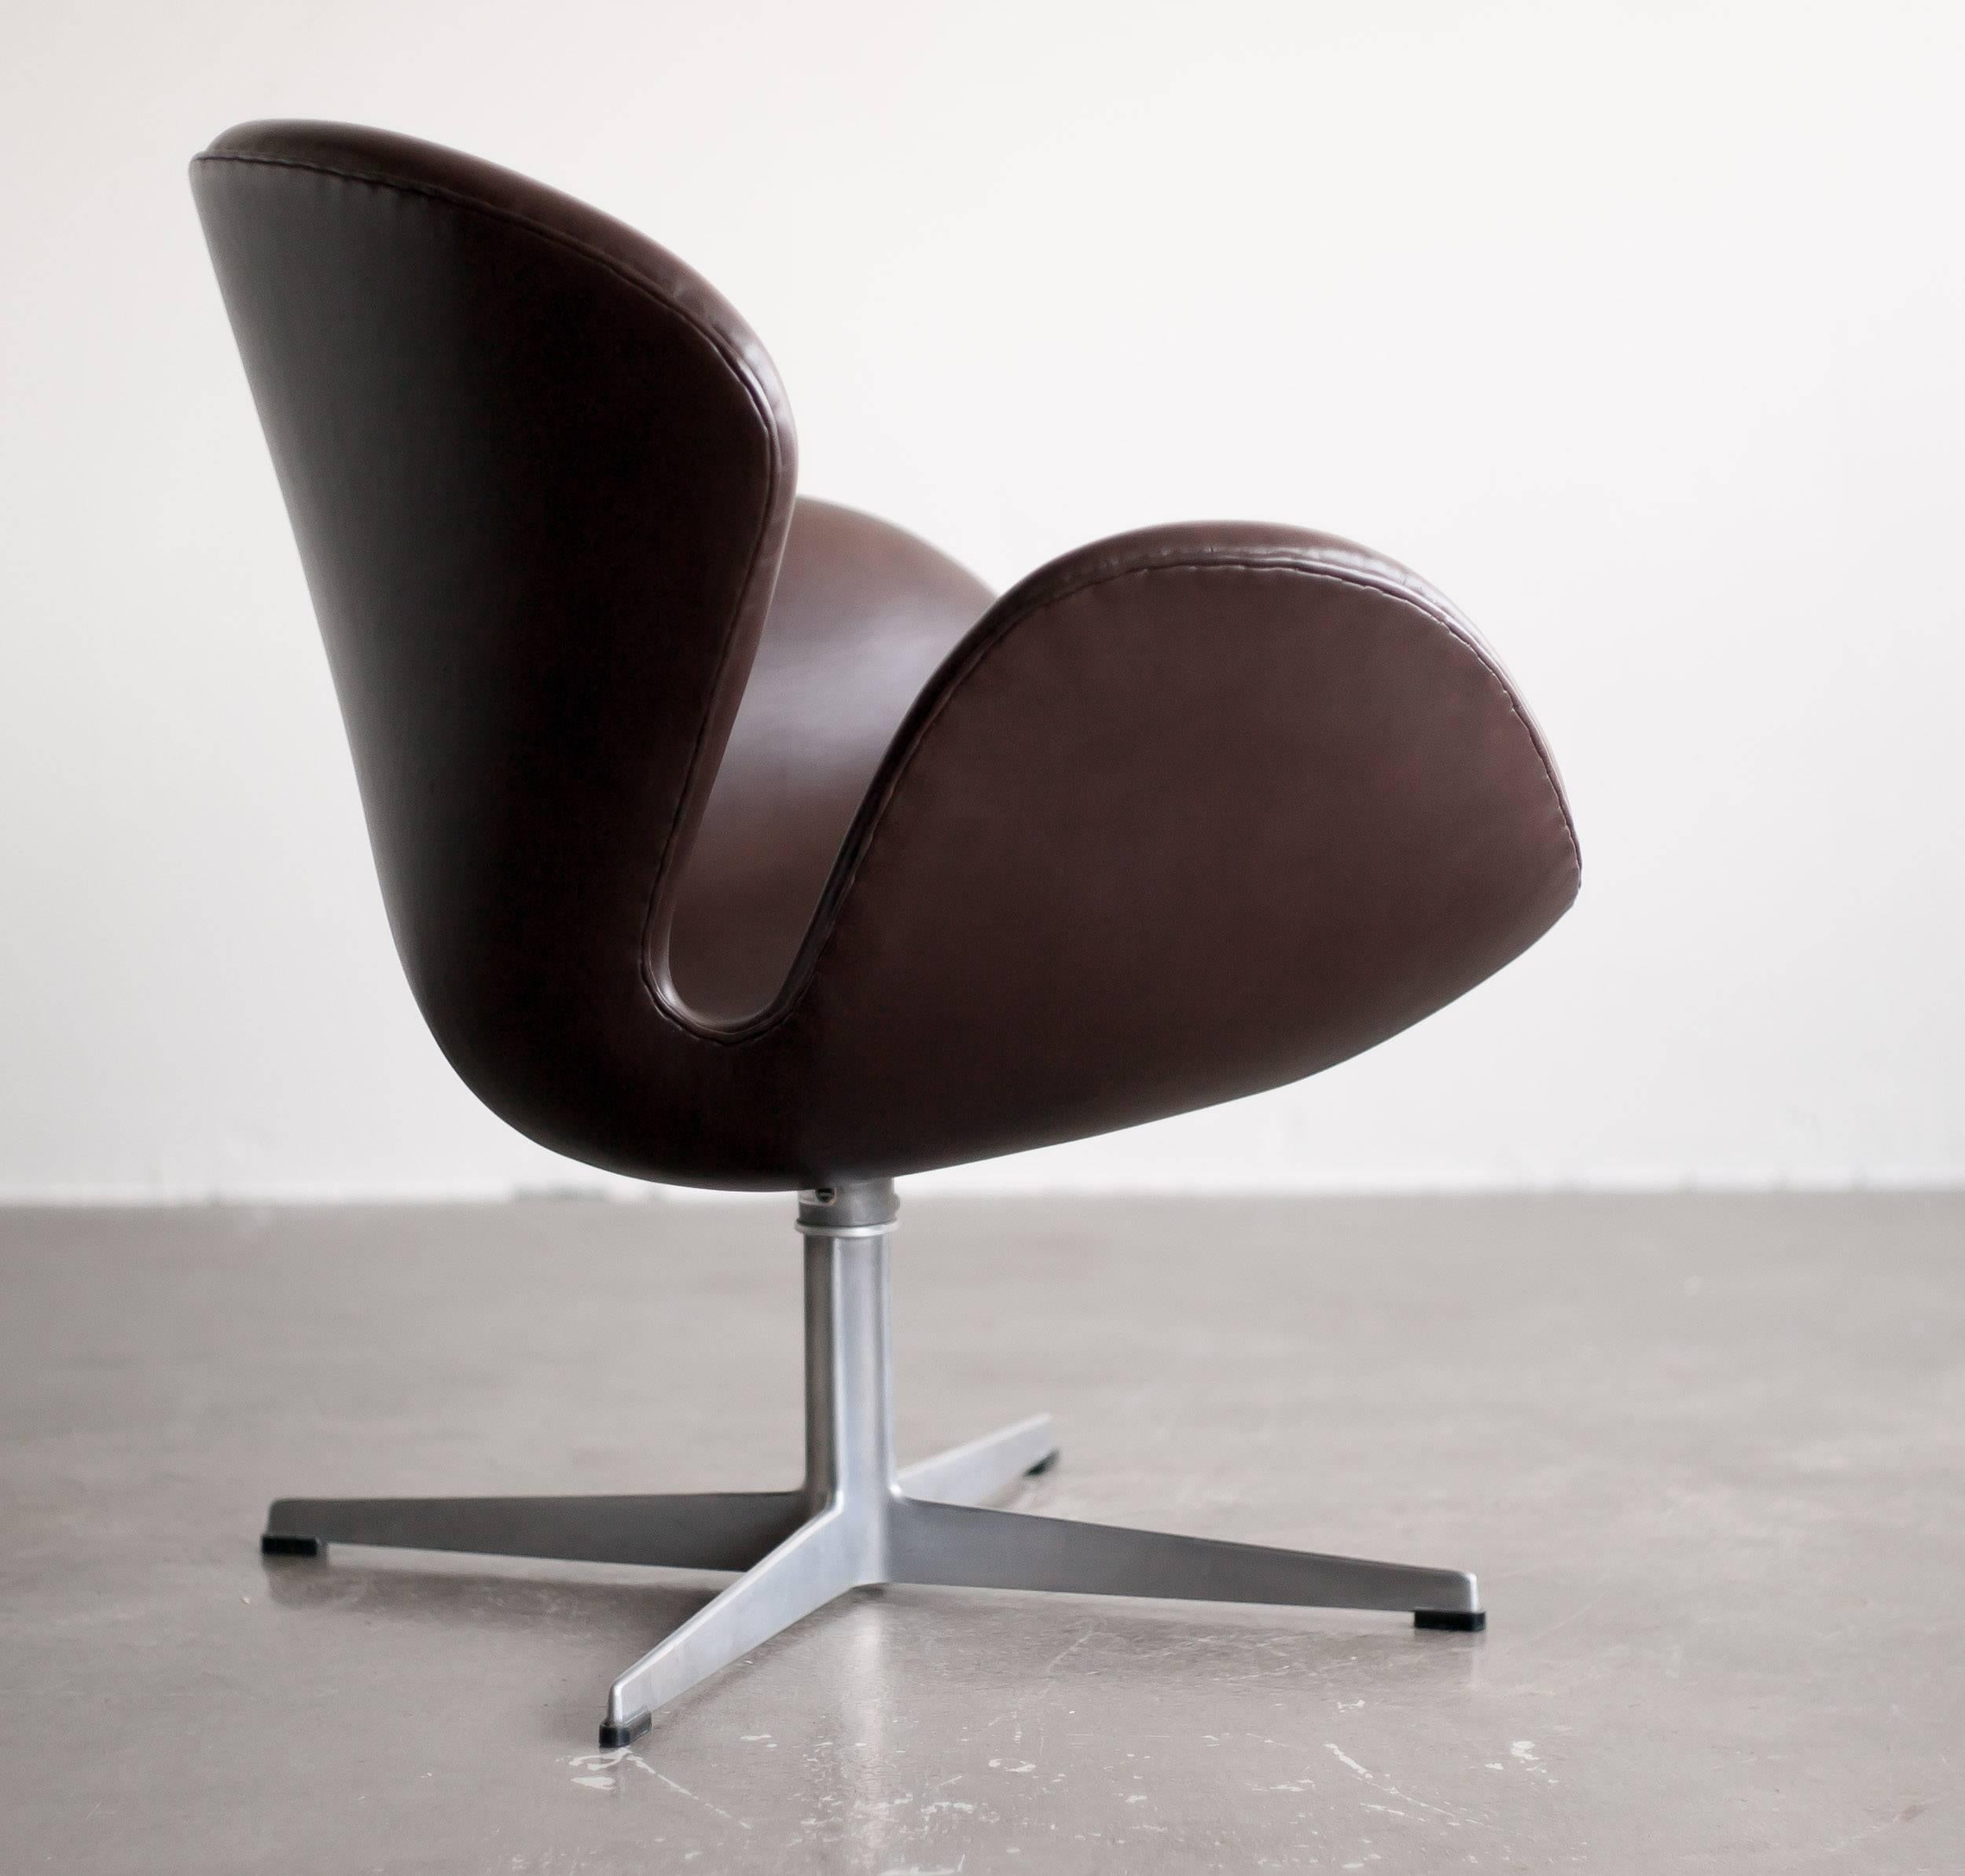 Beautiful swan chair by Arne Jacobsen for Fritz Hansen, upholstered in butter-soft Sorensen dark brown leather.
The solid cast aluminium swivel base distinguishes this chair as a very early example.


          